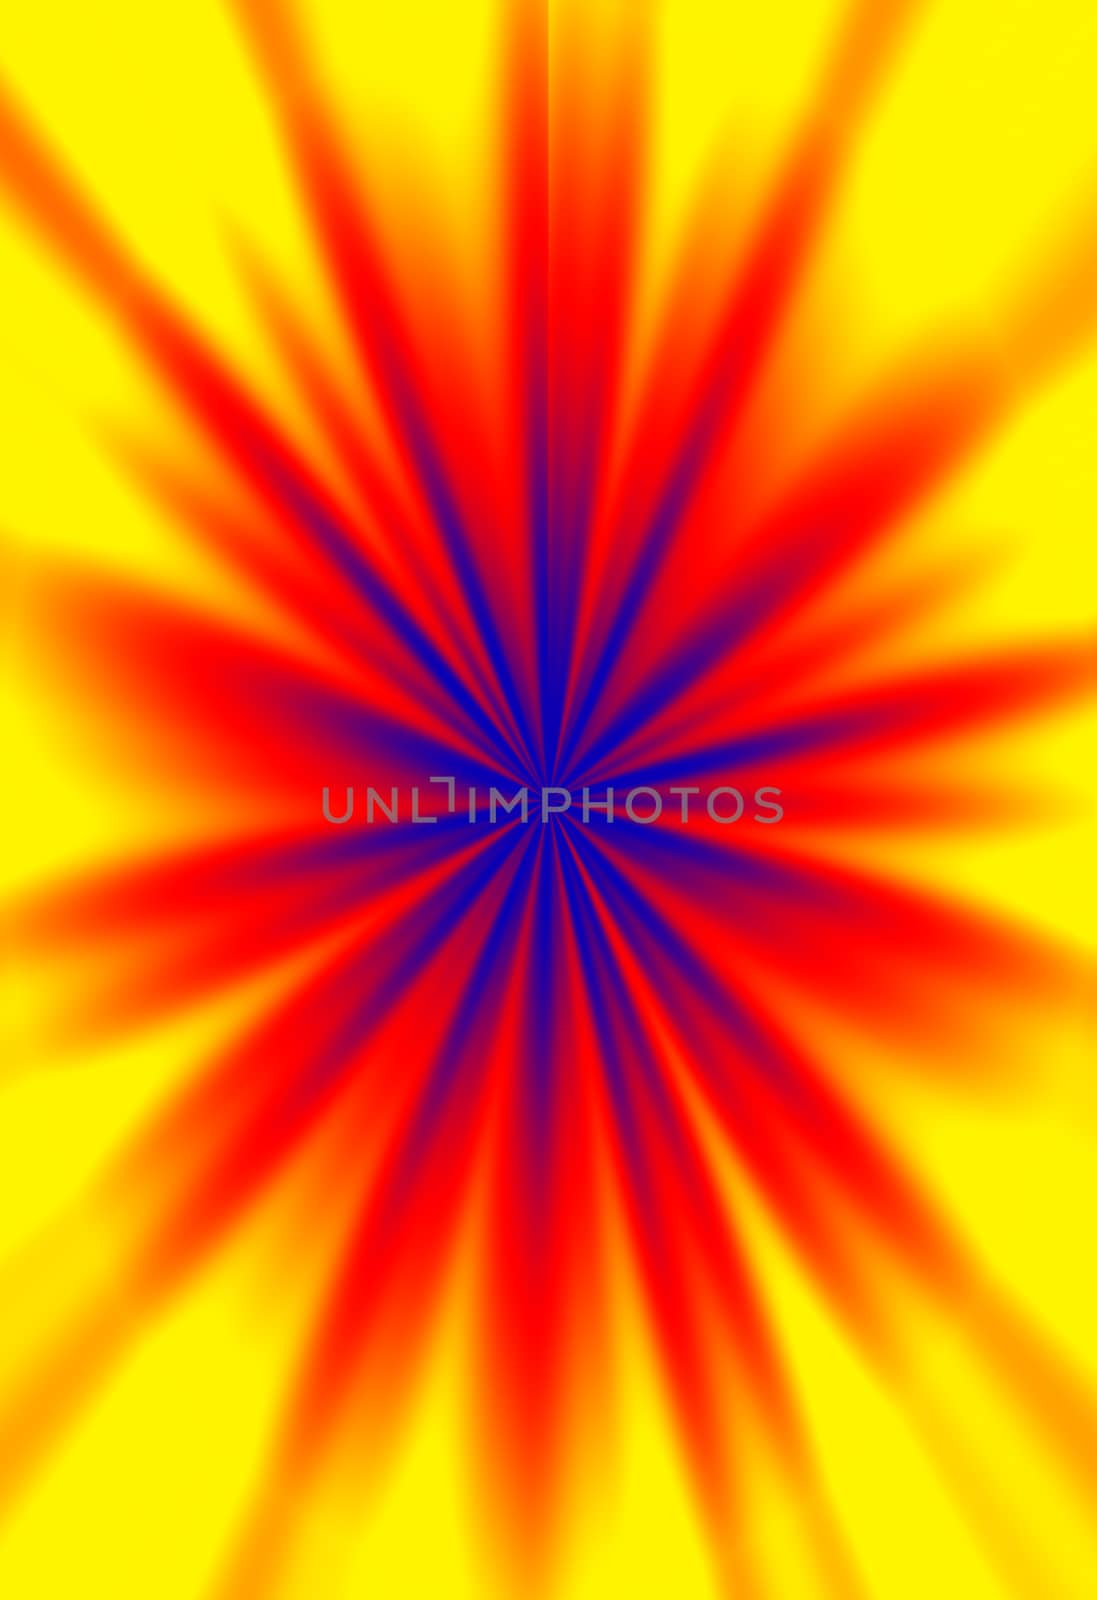 digitally created vivid colored abstract background. Like a flower illustration